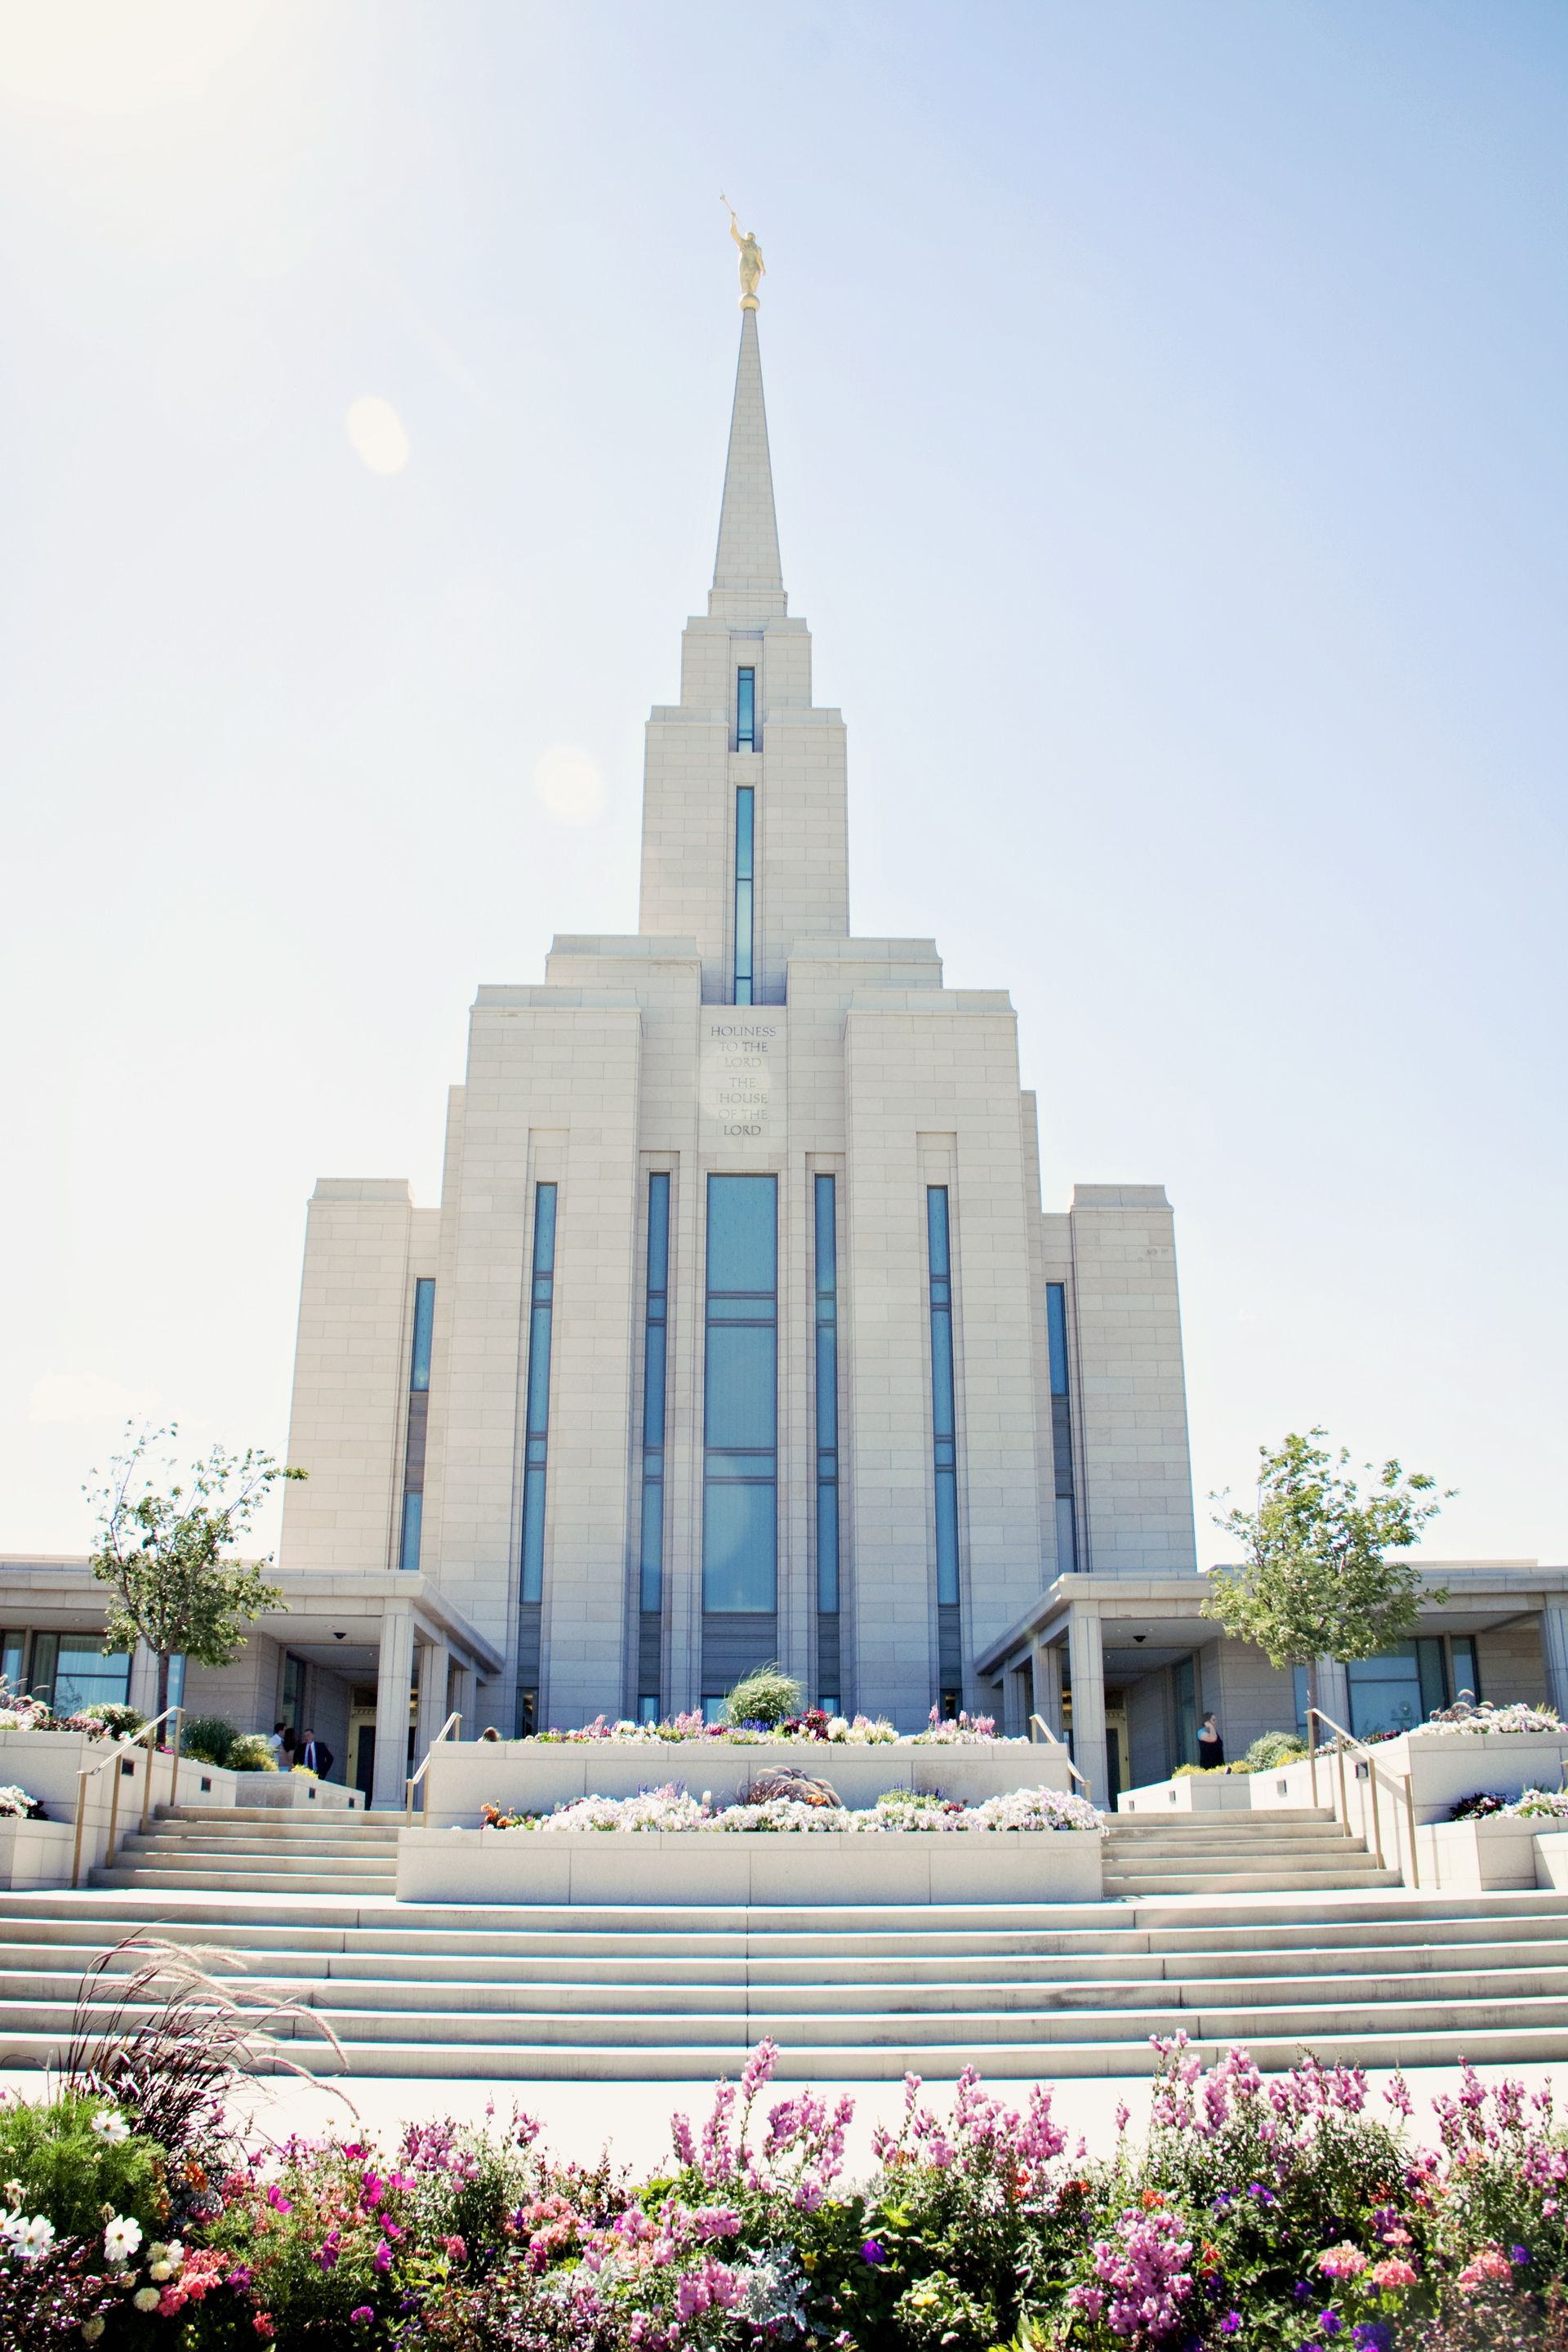 The Oquirrh Mountain Utah Temple, including entrance and scenery.